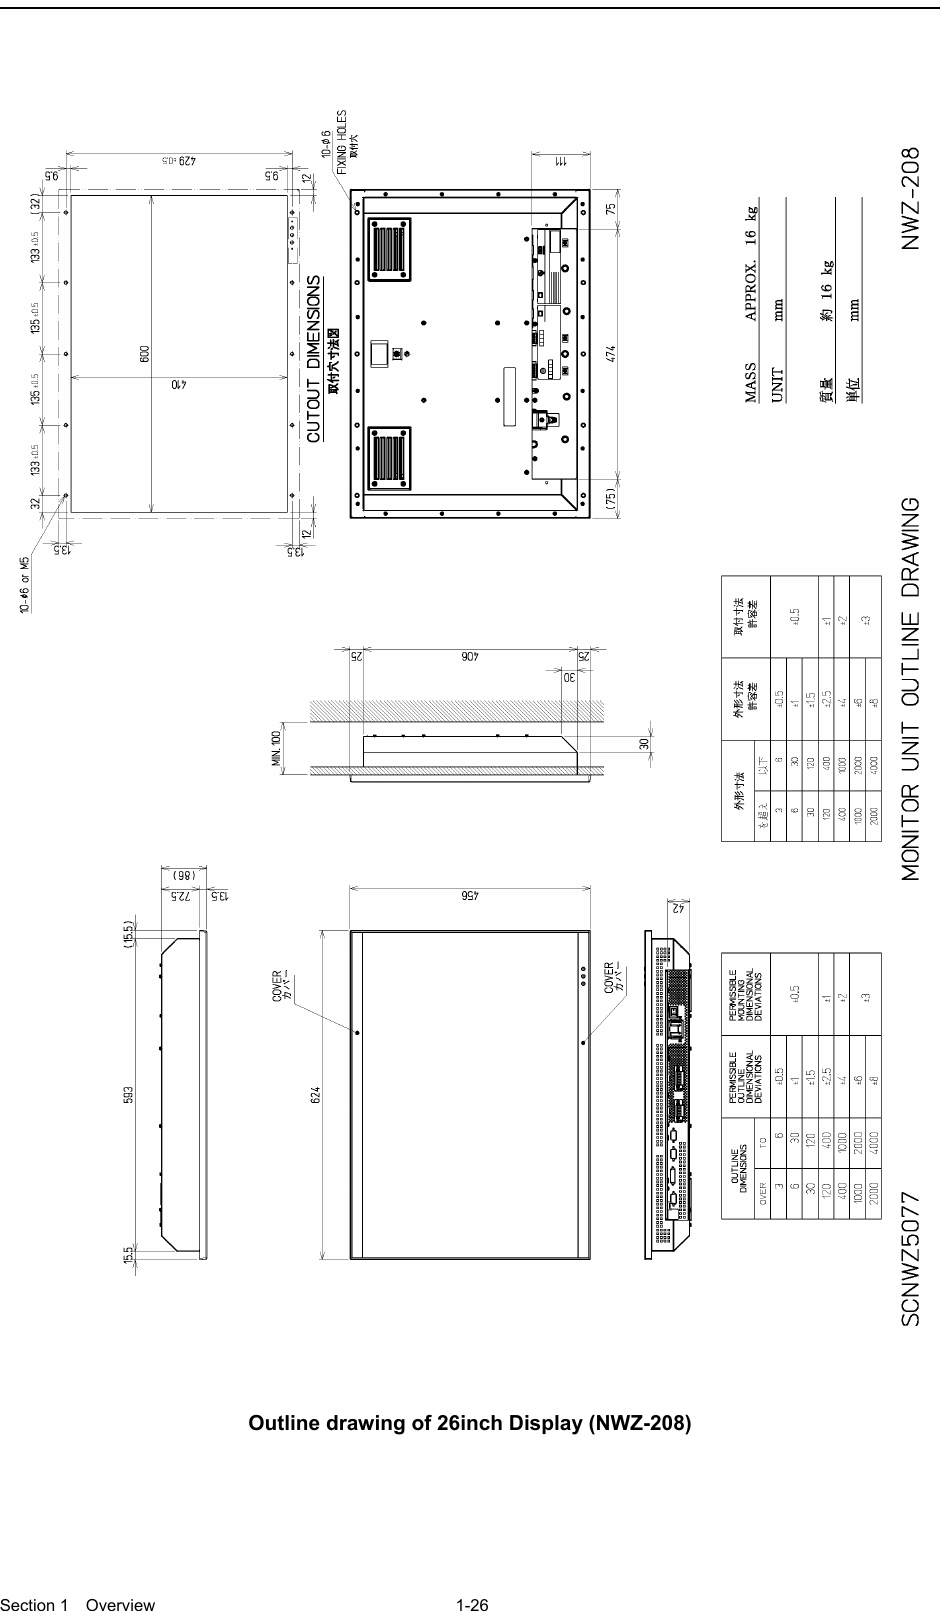  Section 1  Overview 1-26    Outline drawing of 26inch Display (NWZ-208)   